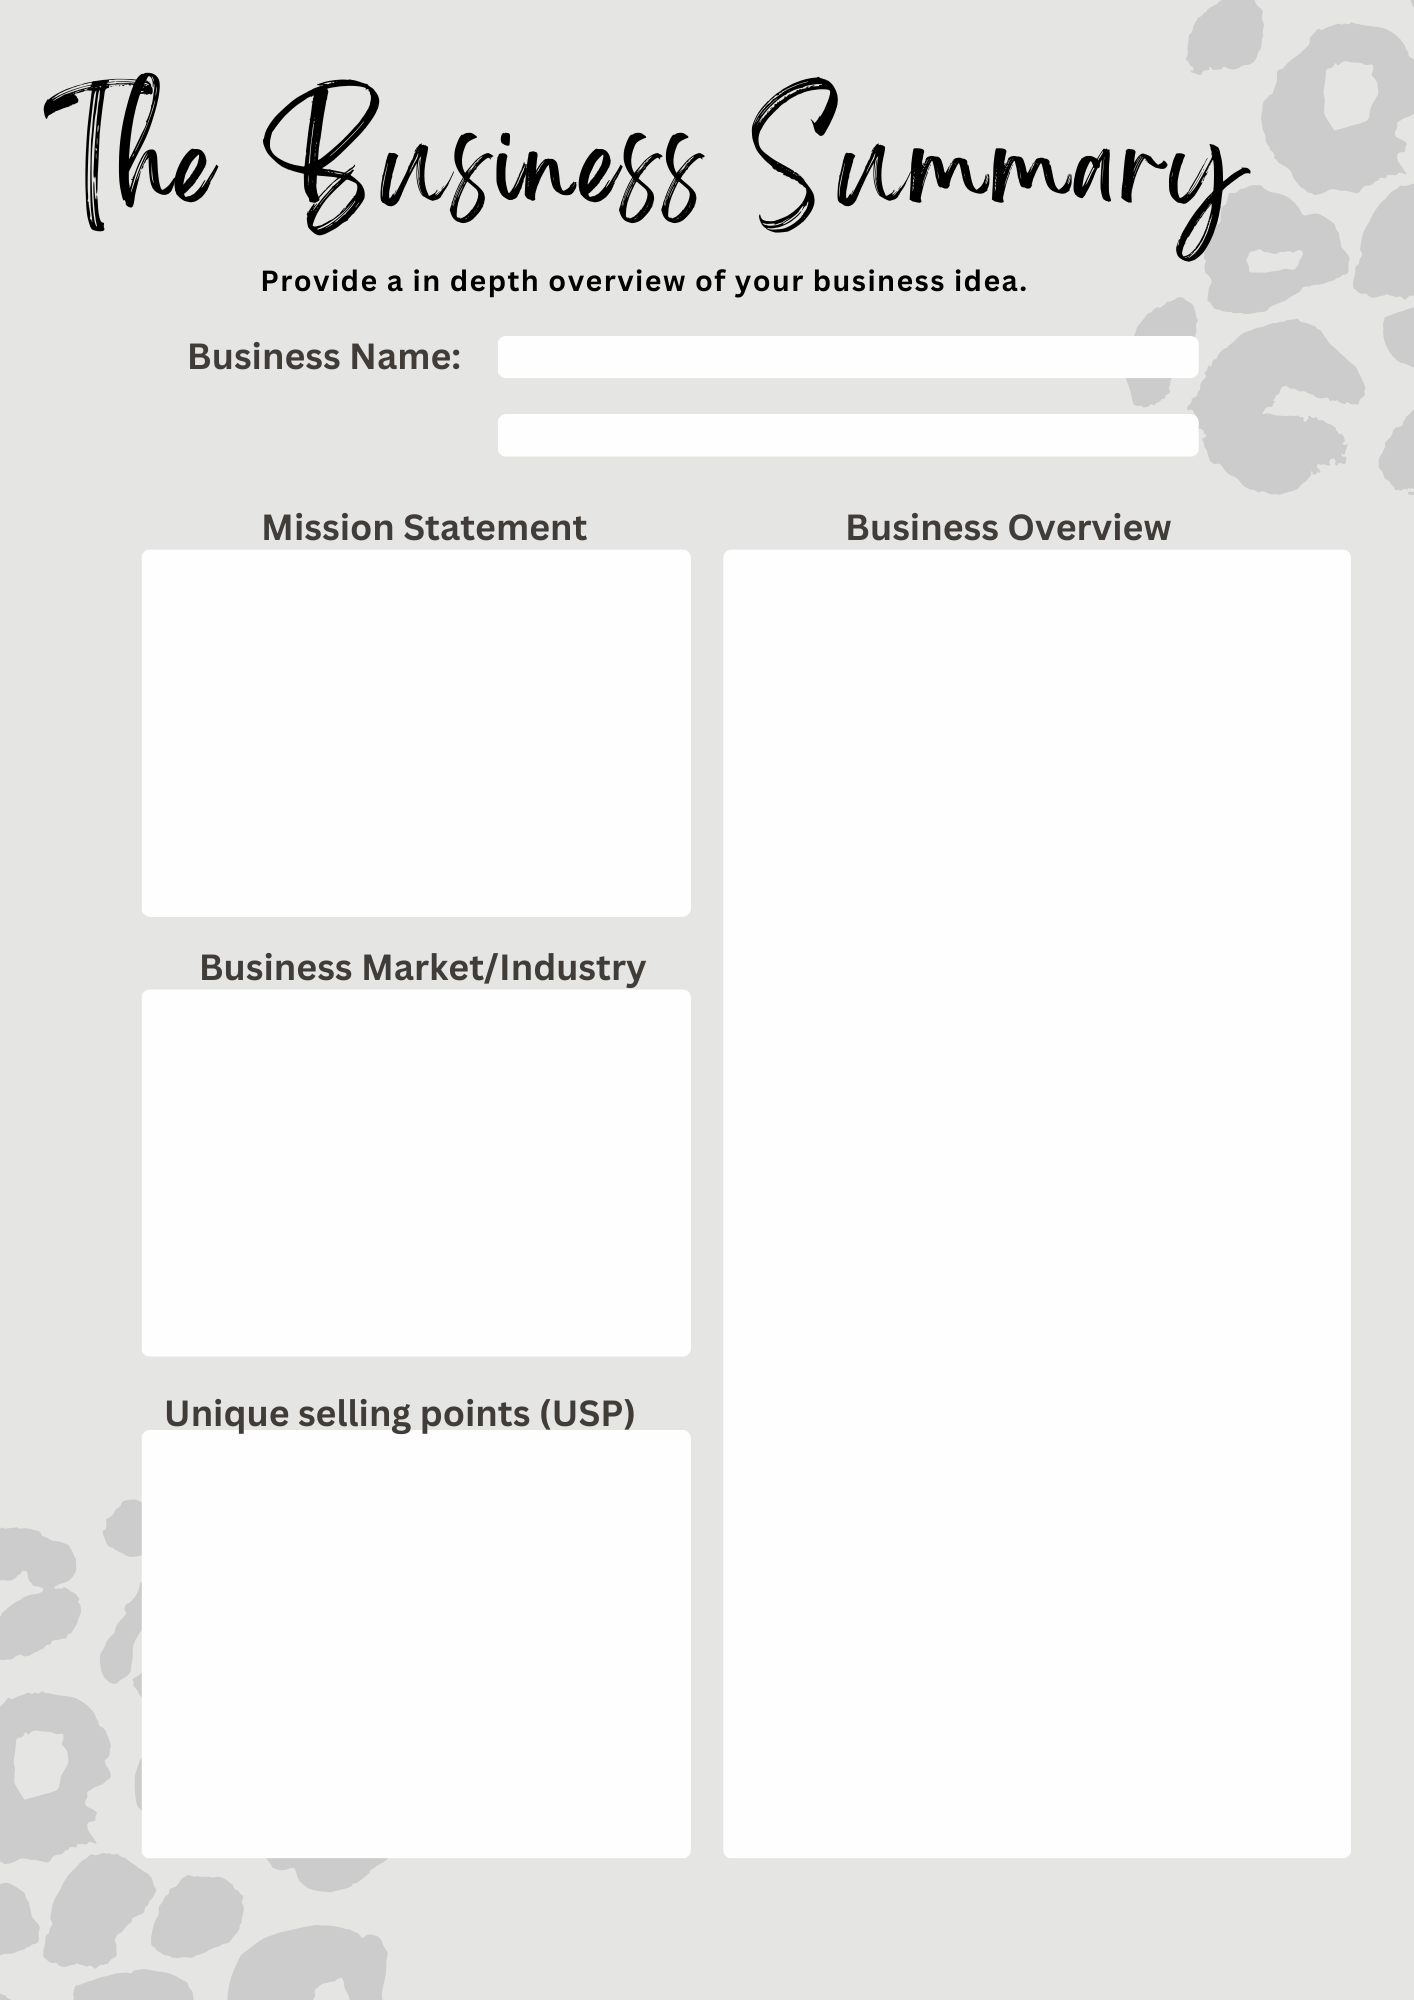 Free Budget Business Planner